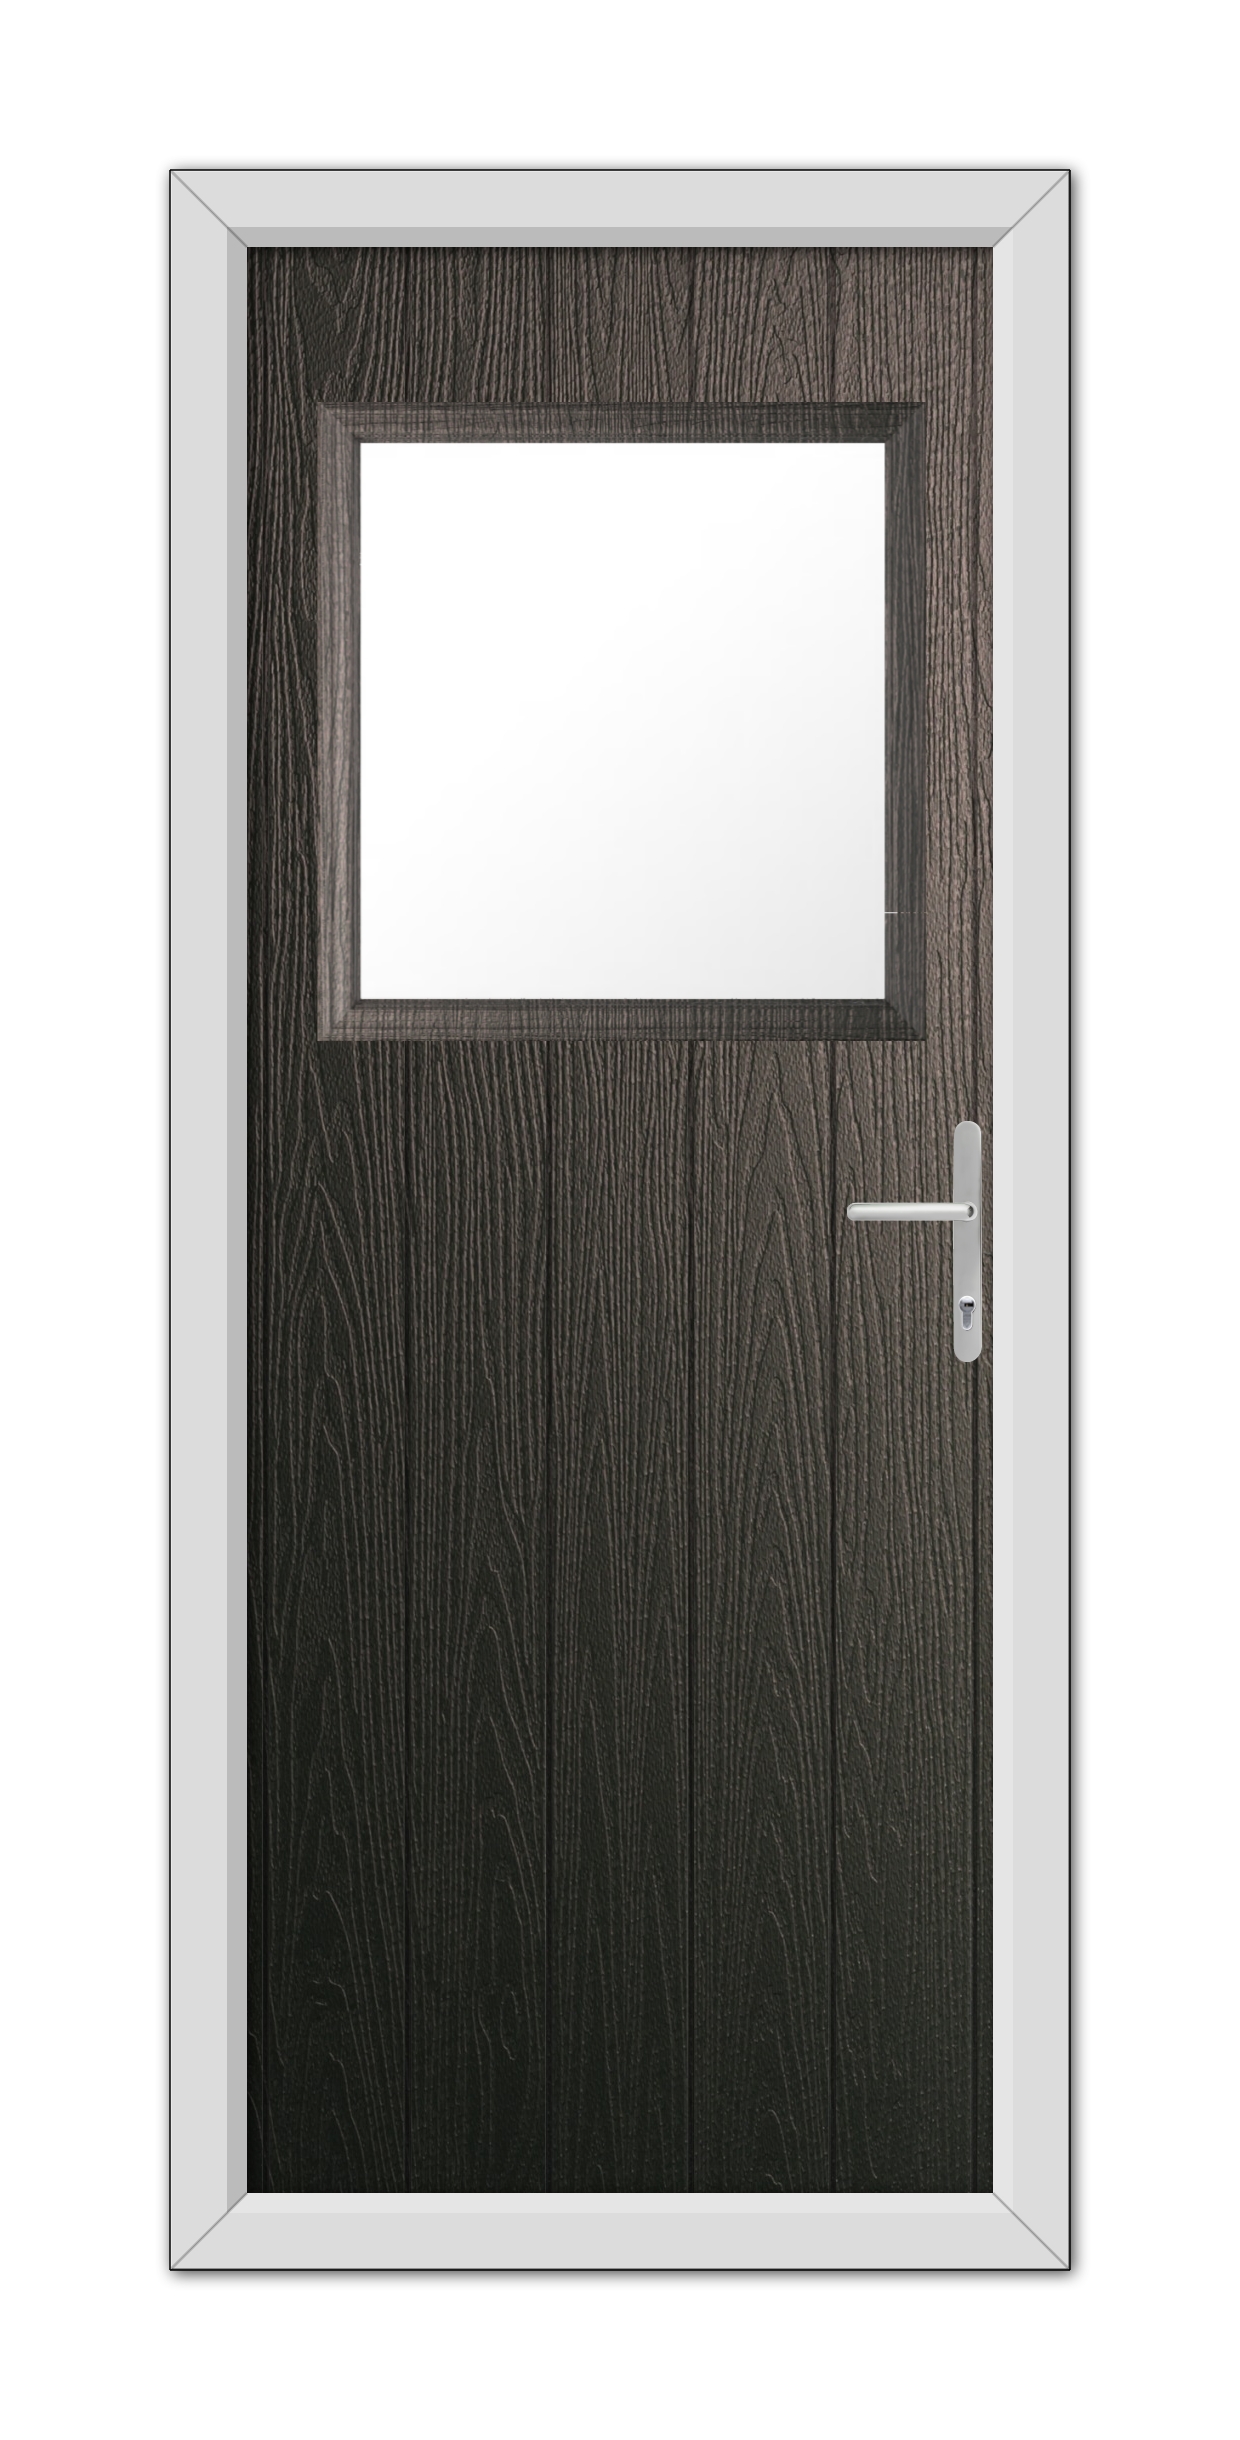 A closed Schwarzbraun Fife Composite Door 48mm Timber Core with a square window and a metallic handle, set within a light frame, isolated on a white background.